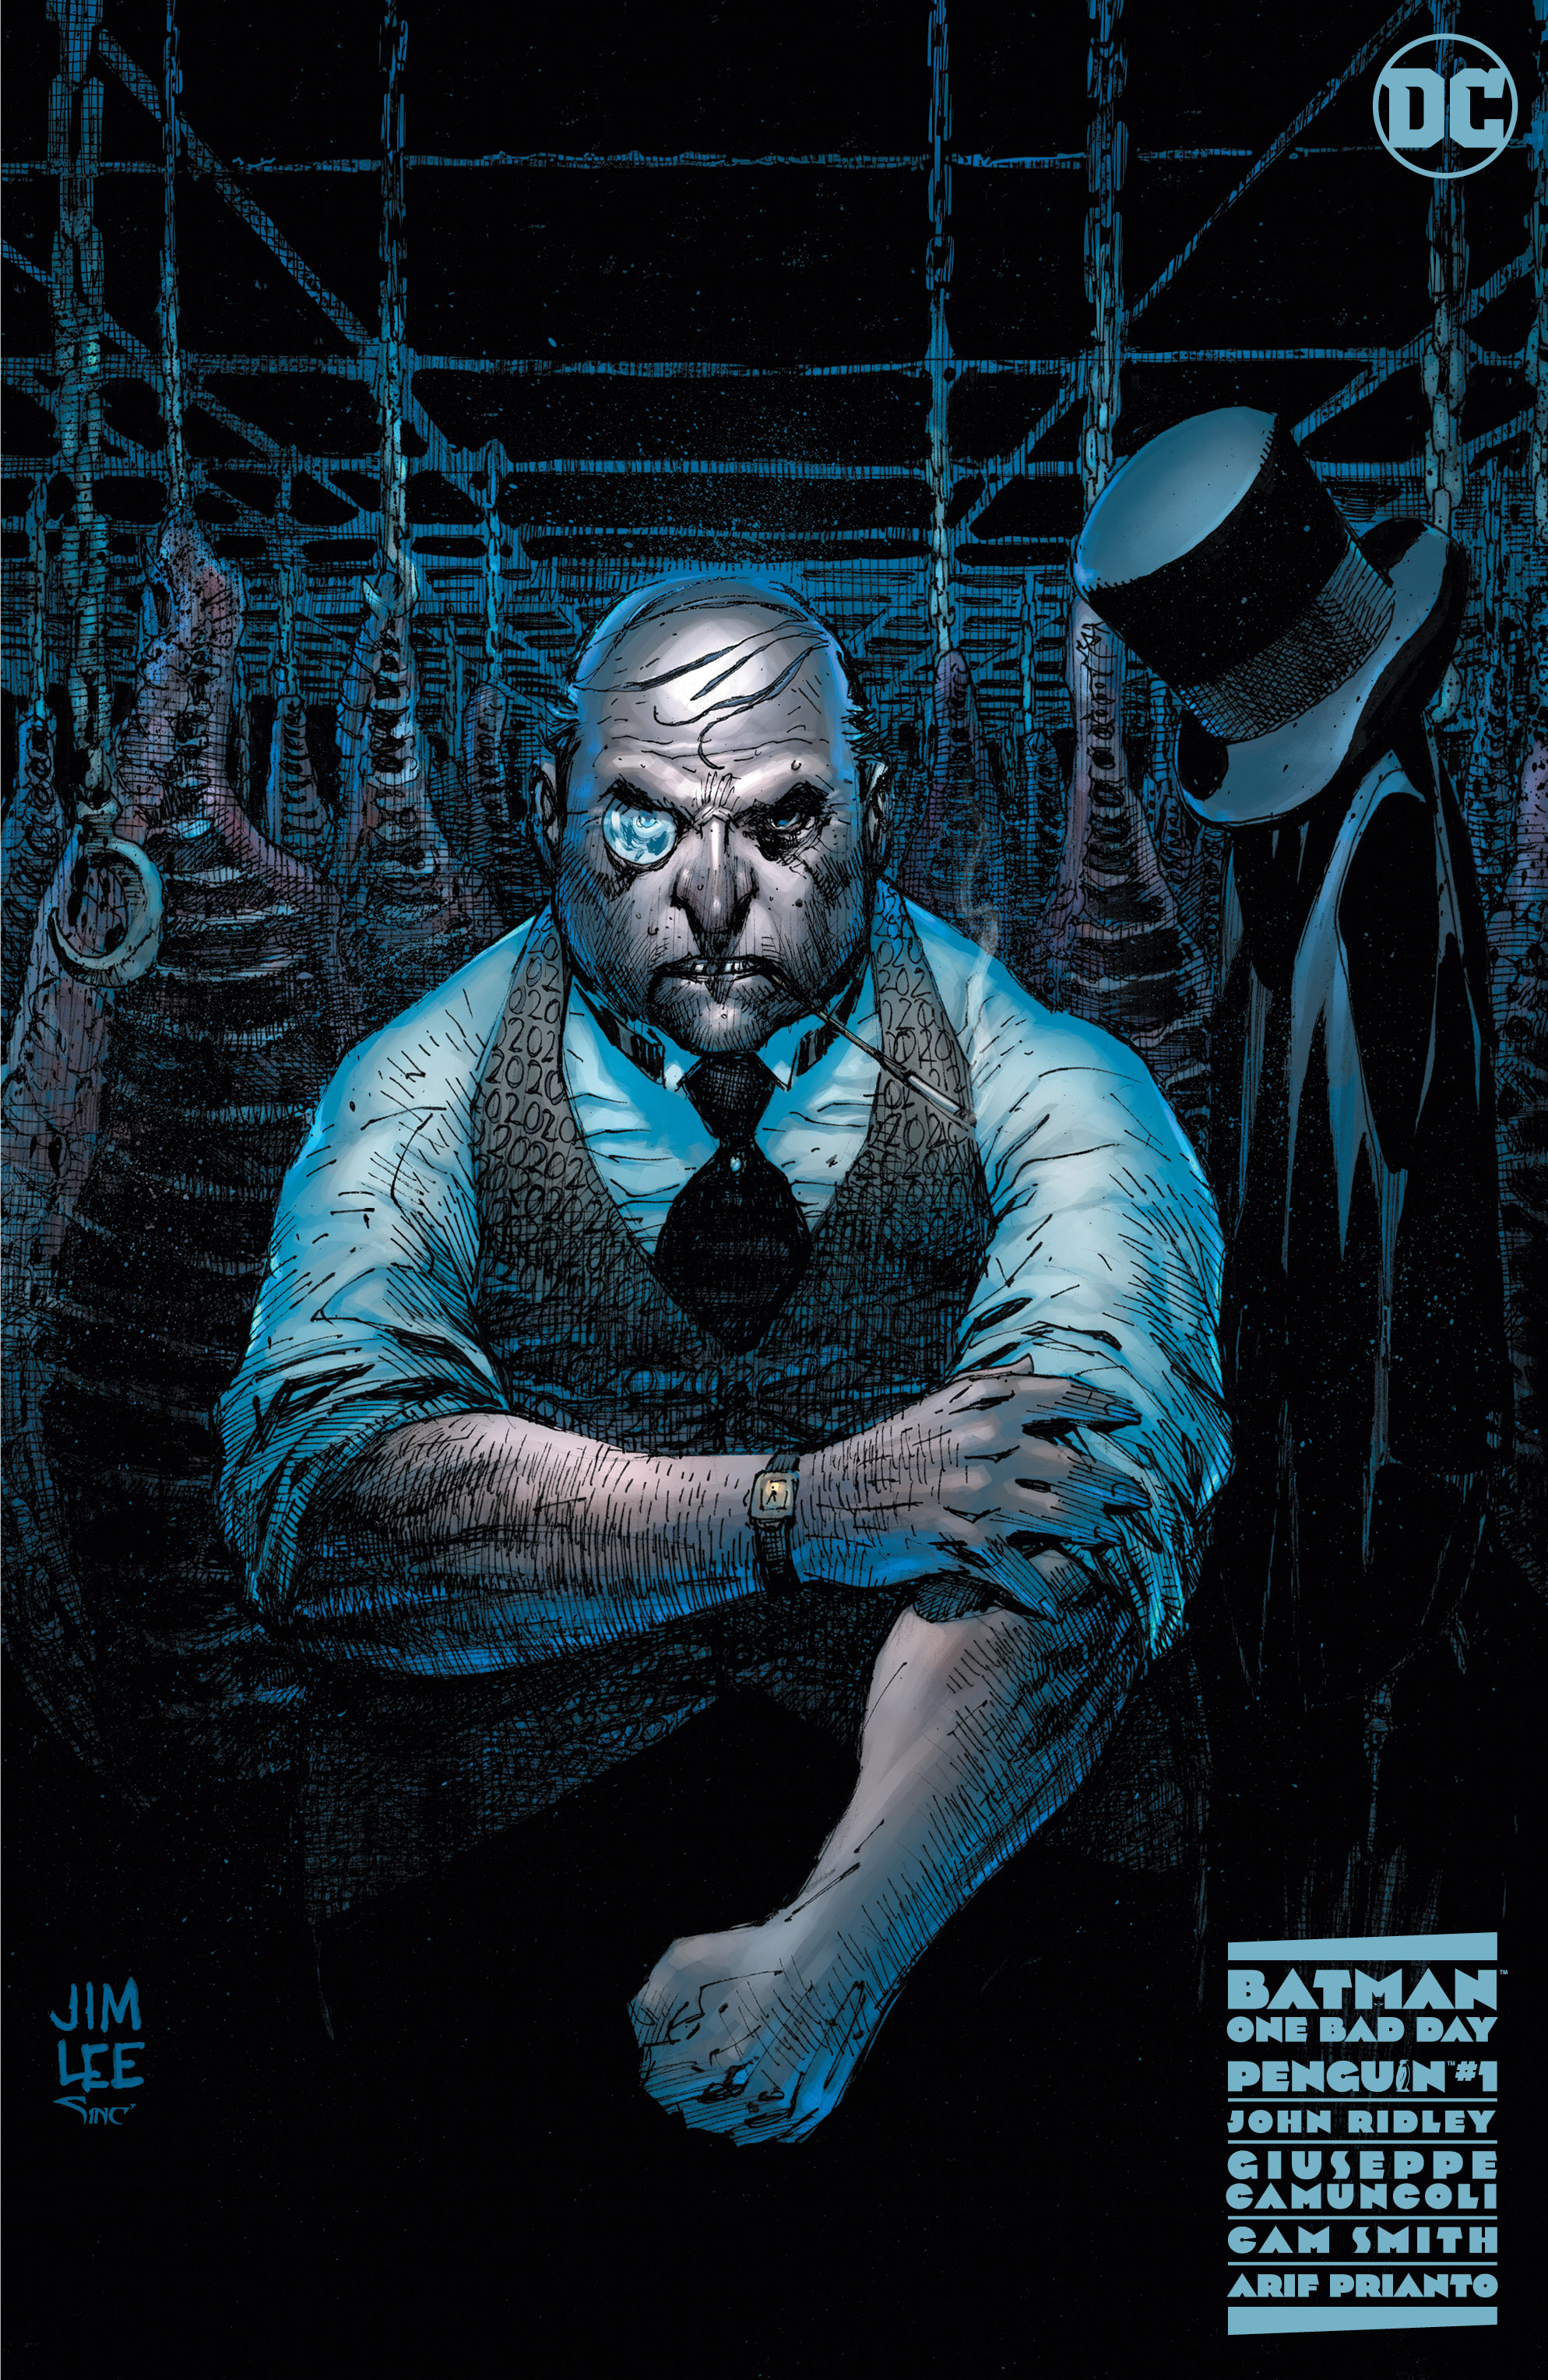 Batman One Bad Day Penguin #1 (One Shot) Cover E 1 for 100